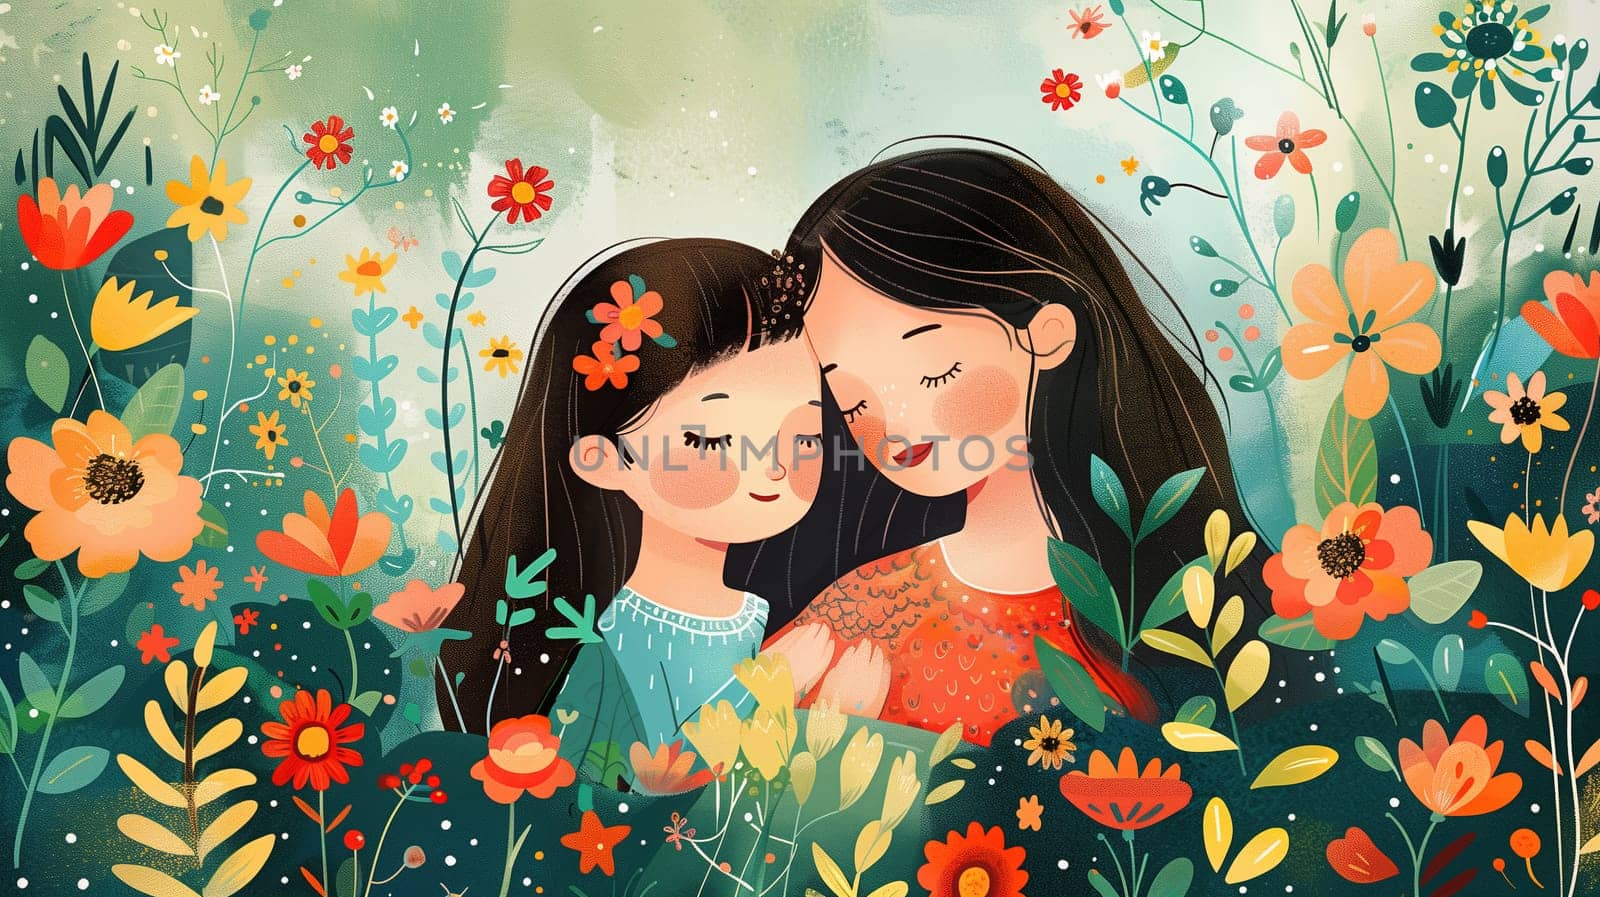 Two Girls in a Field of Flowers by TRMK